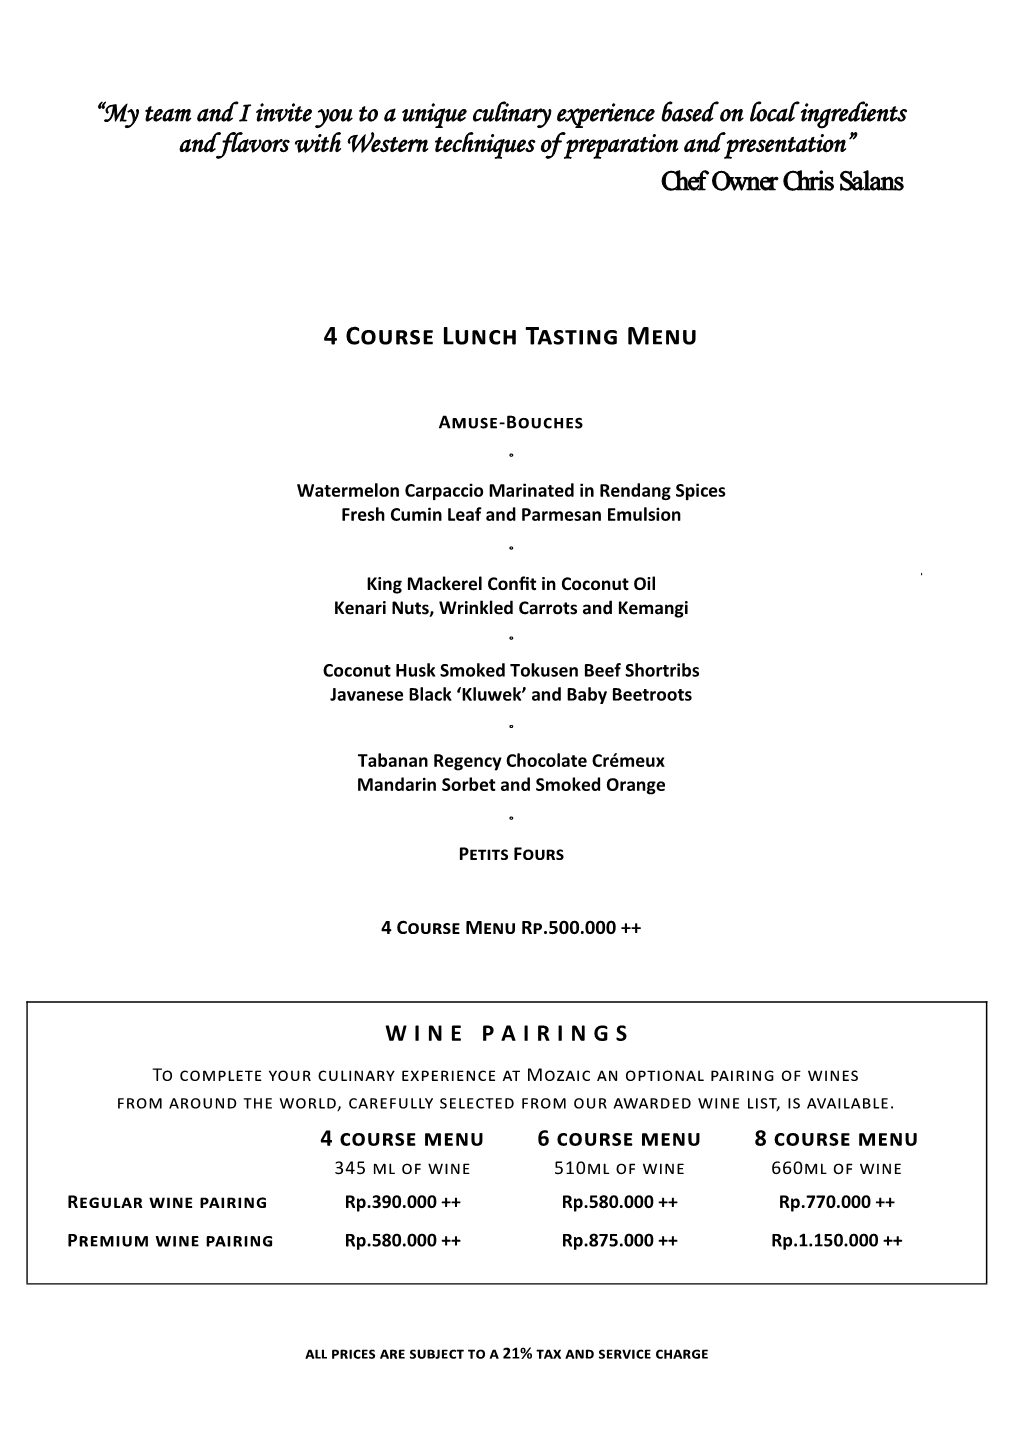 4 Course Lunch Tasting Menu